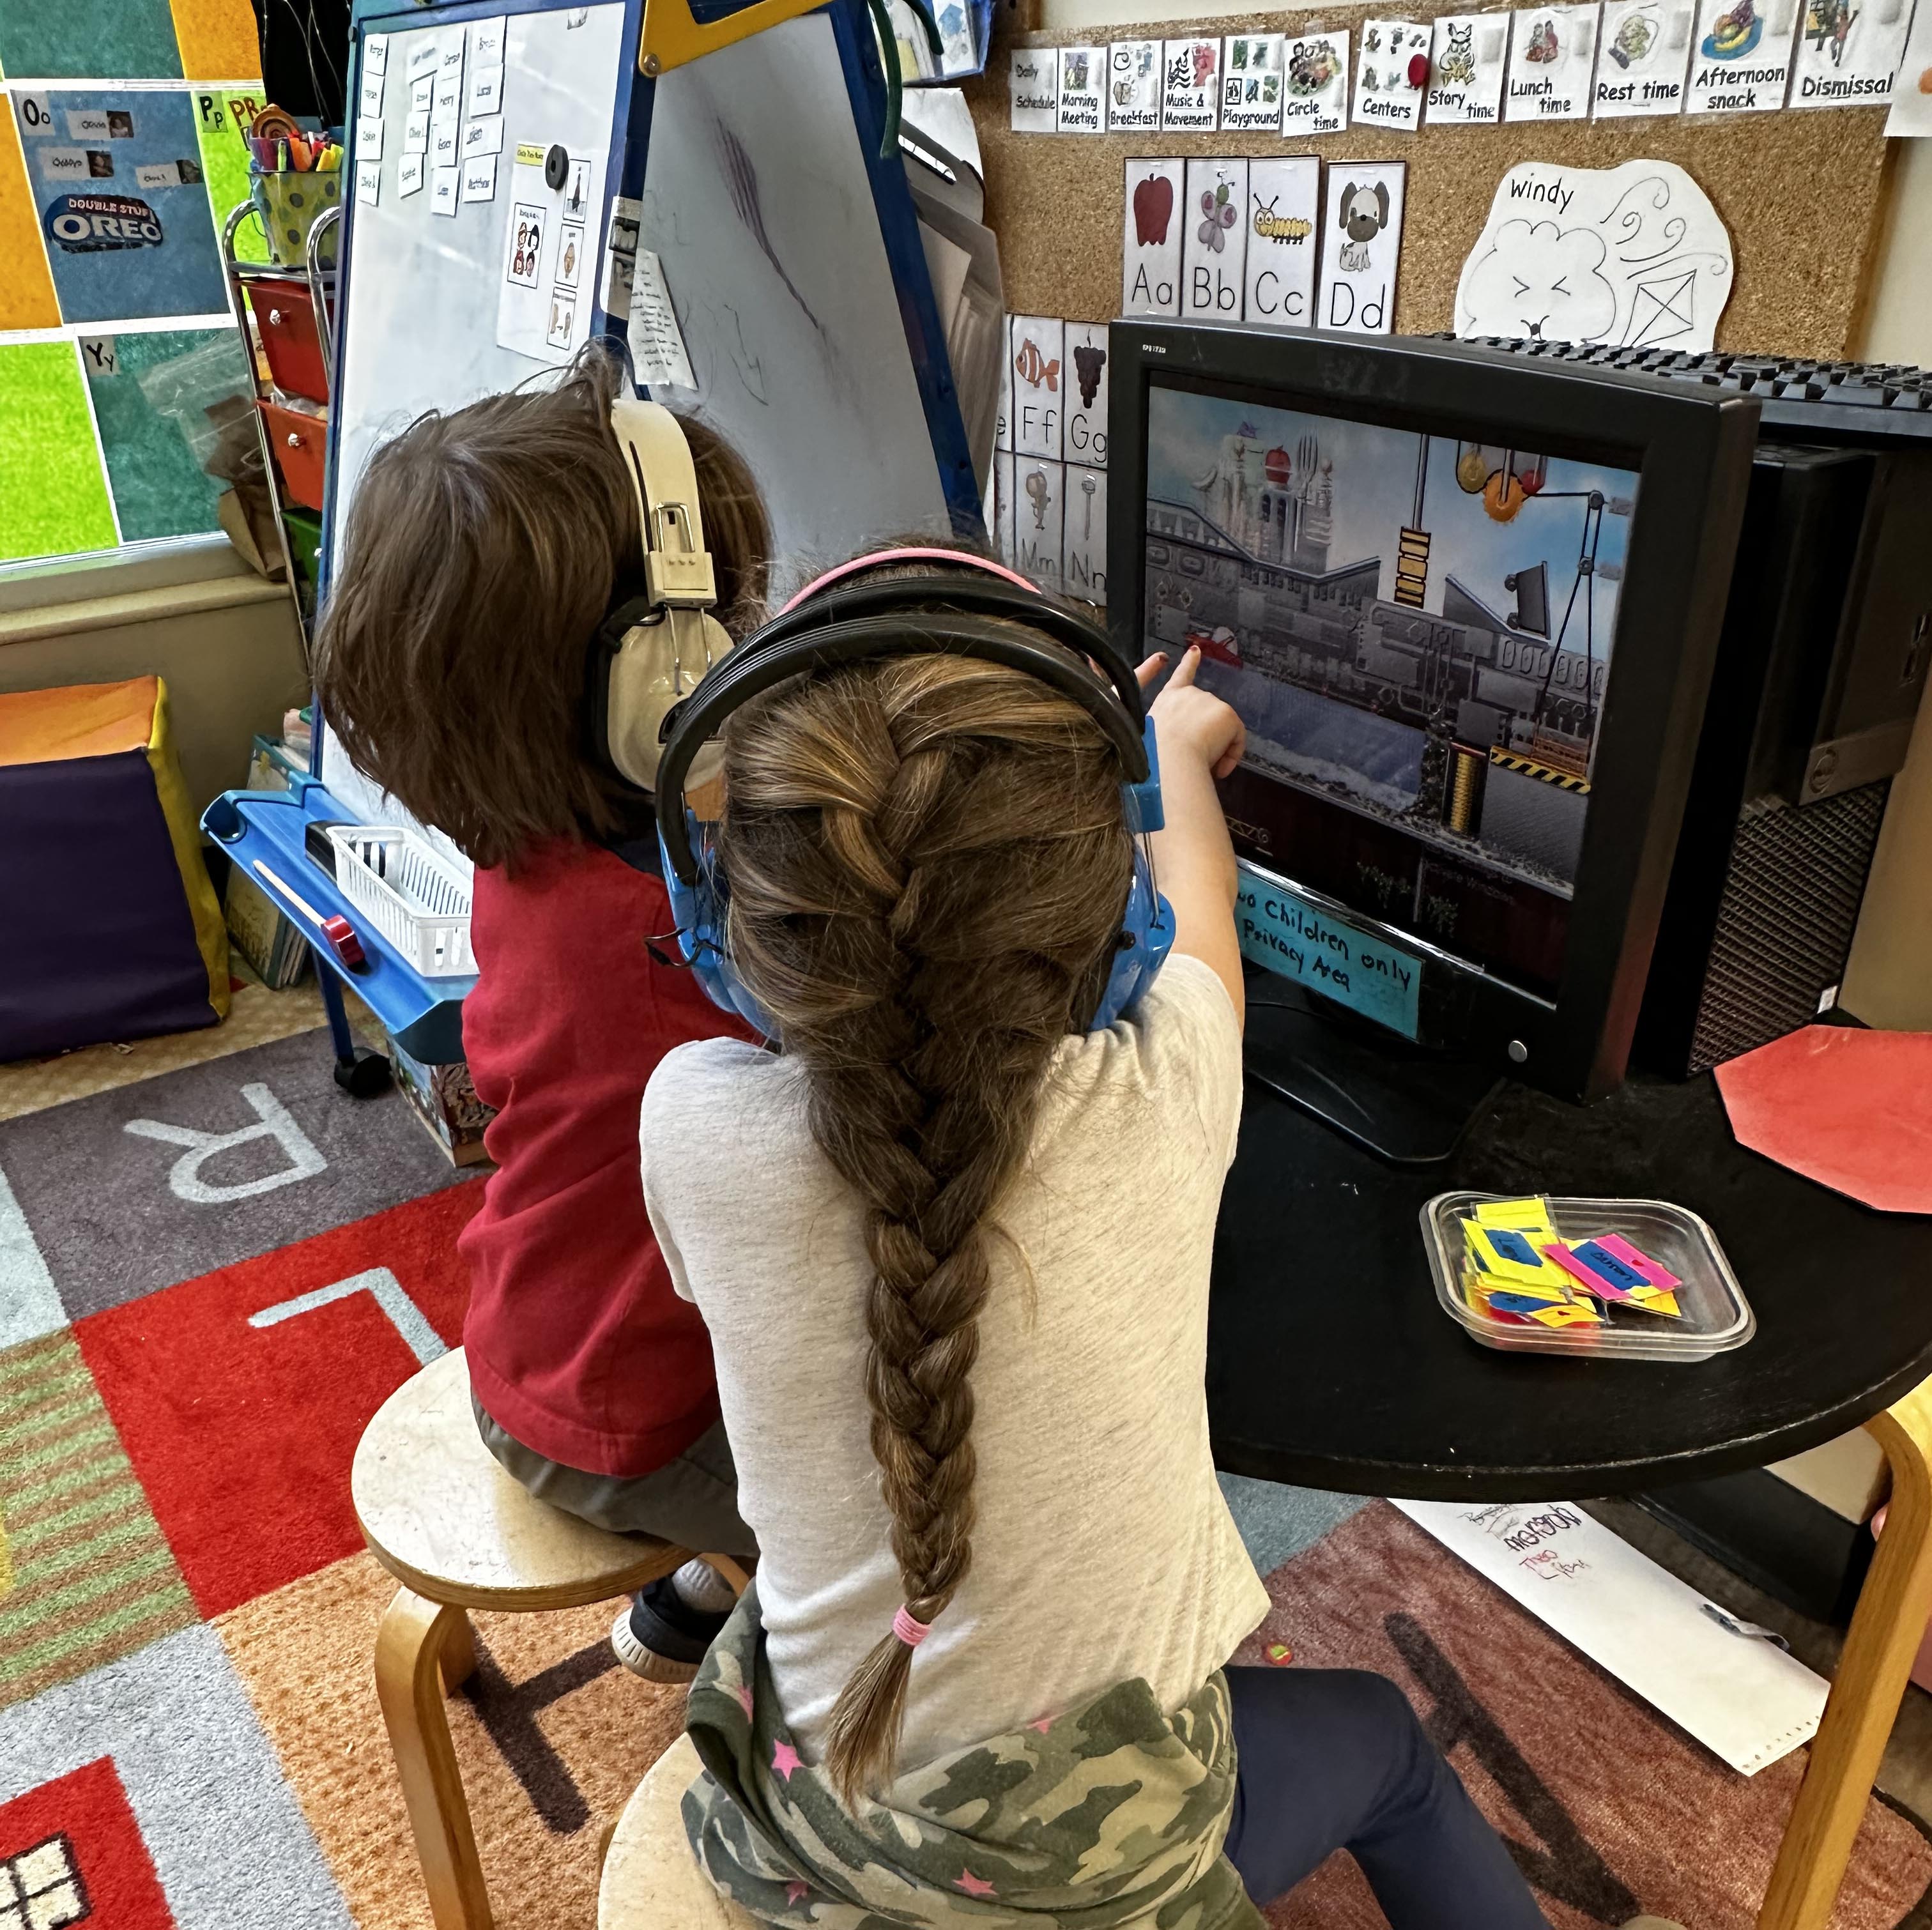 two children with headphones on pointing at computer screen playing a computer game